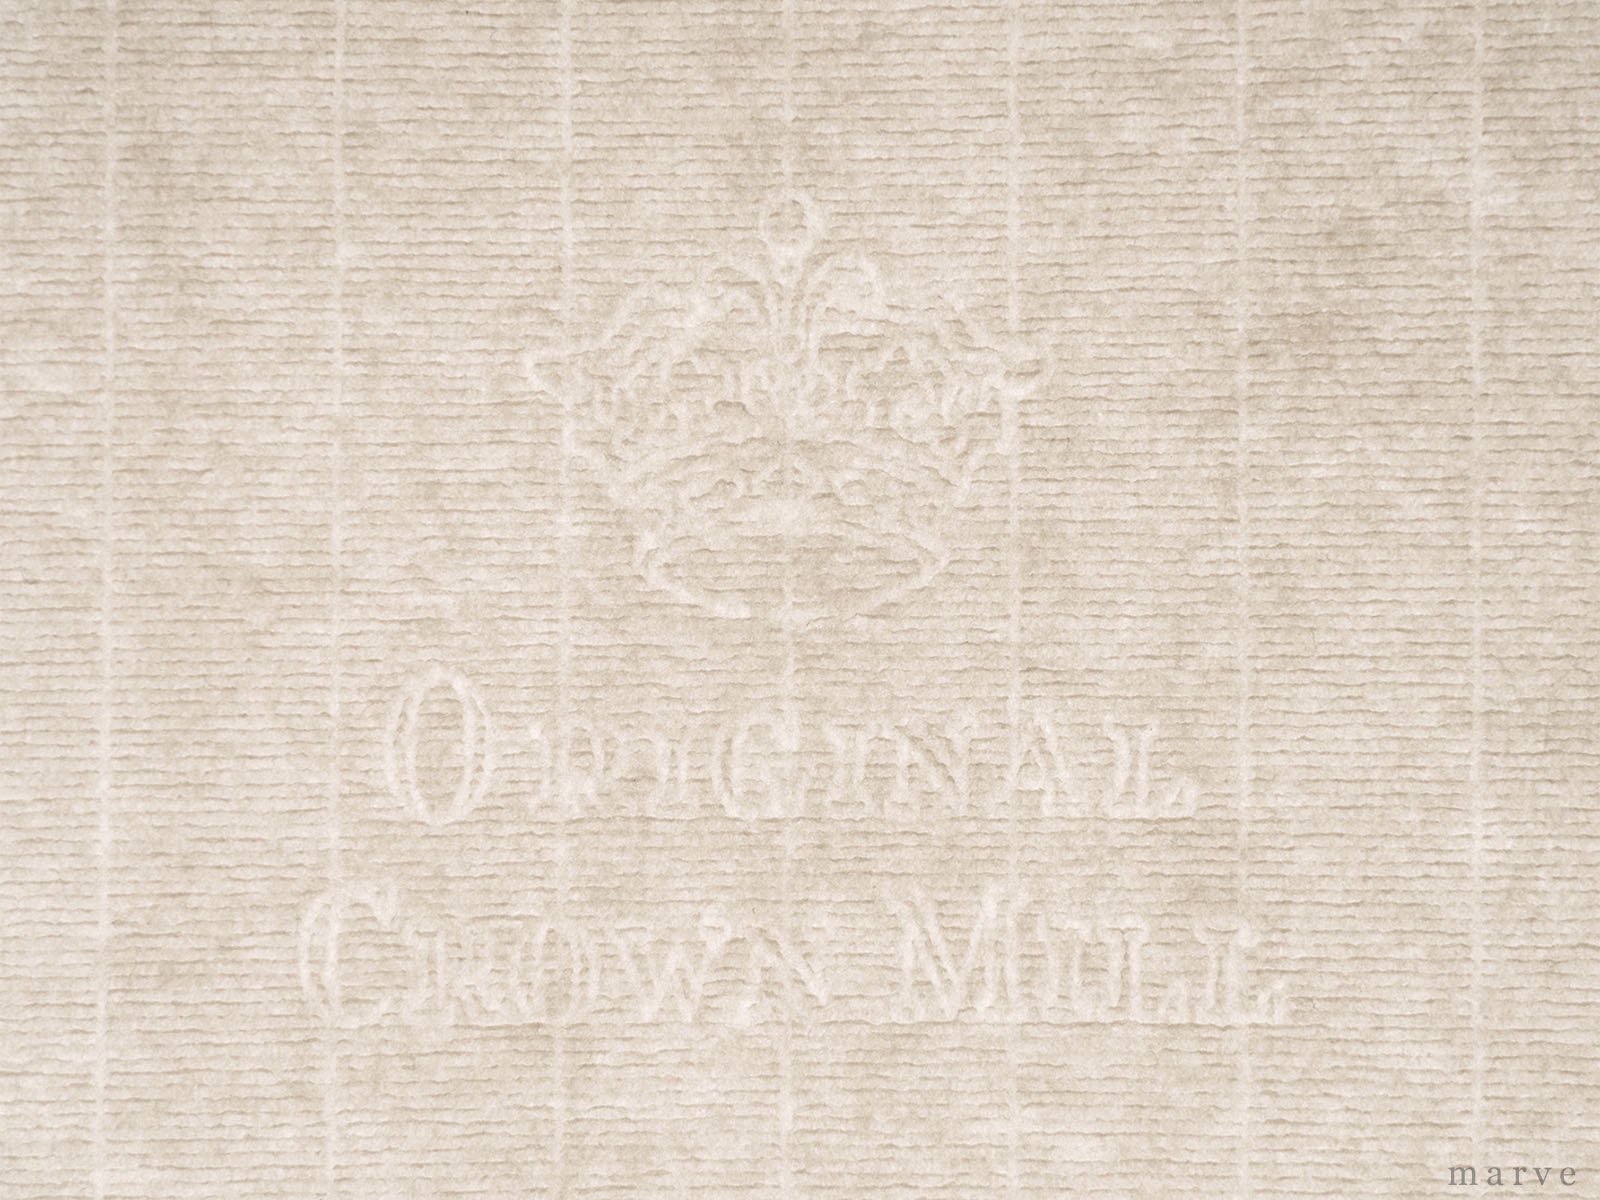 ORIGINAL CROWN MILL　コンピューターラインA4（50枚入）100gクリーム<img class='new_mark_img2' src='https://img.shop-pro.jp/img/new/icons1.gif' style='border:none;display:inline;margin:0px;padding:0px;width:auto;' />